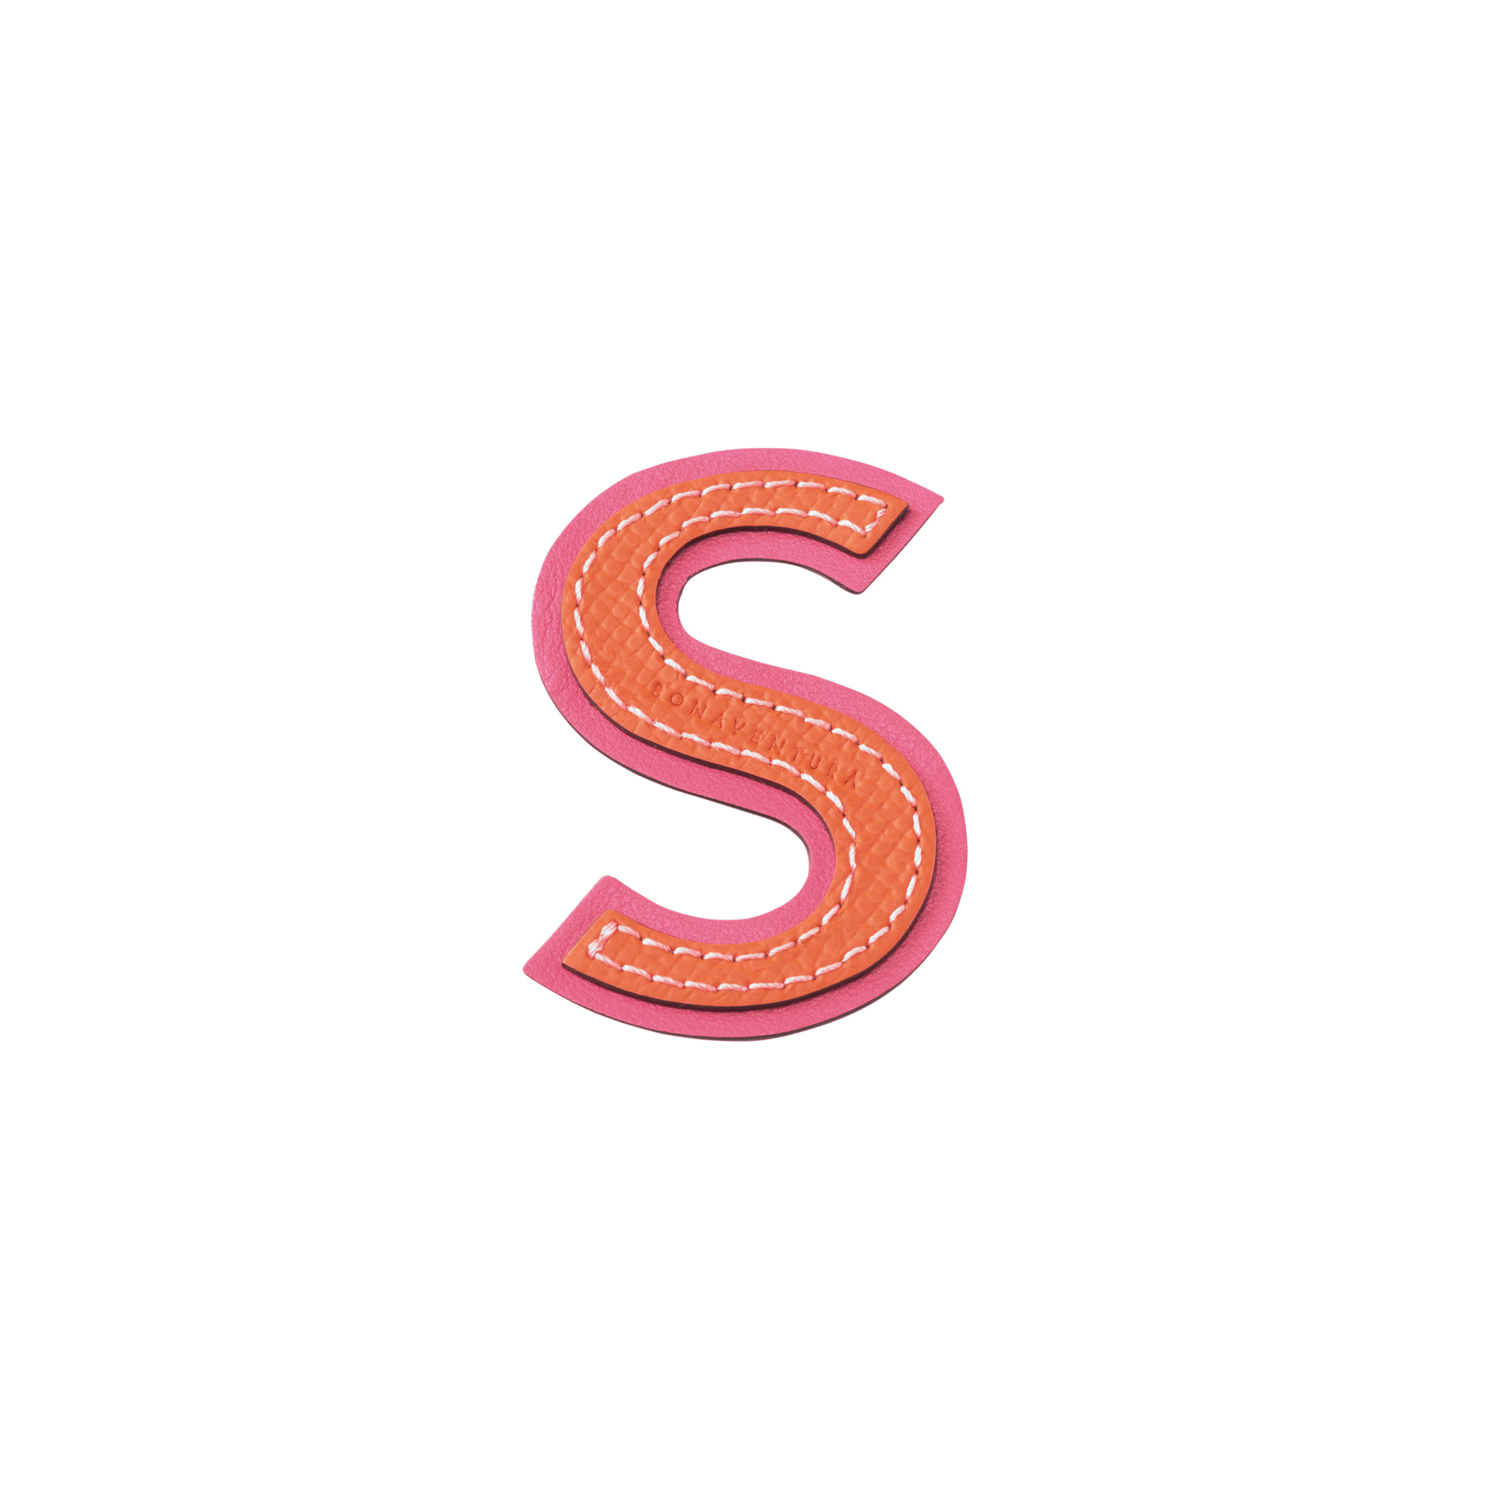 Initial letter -S